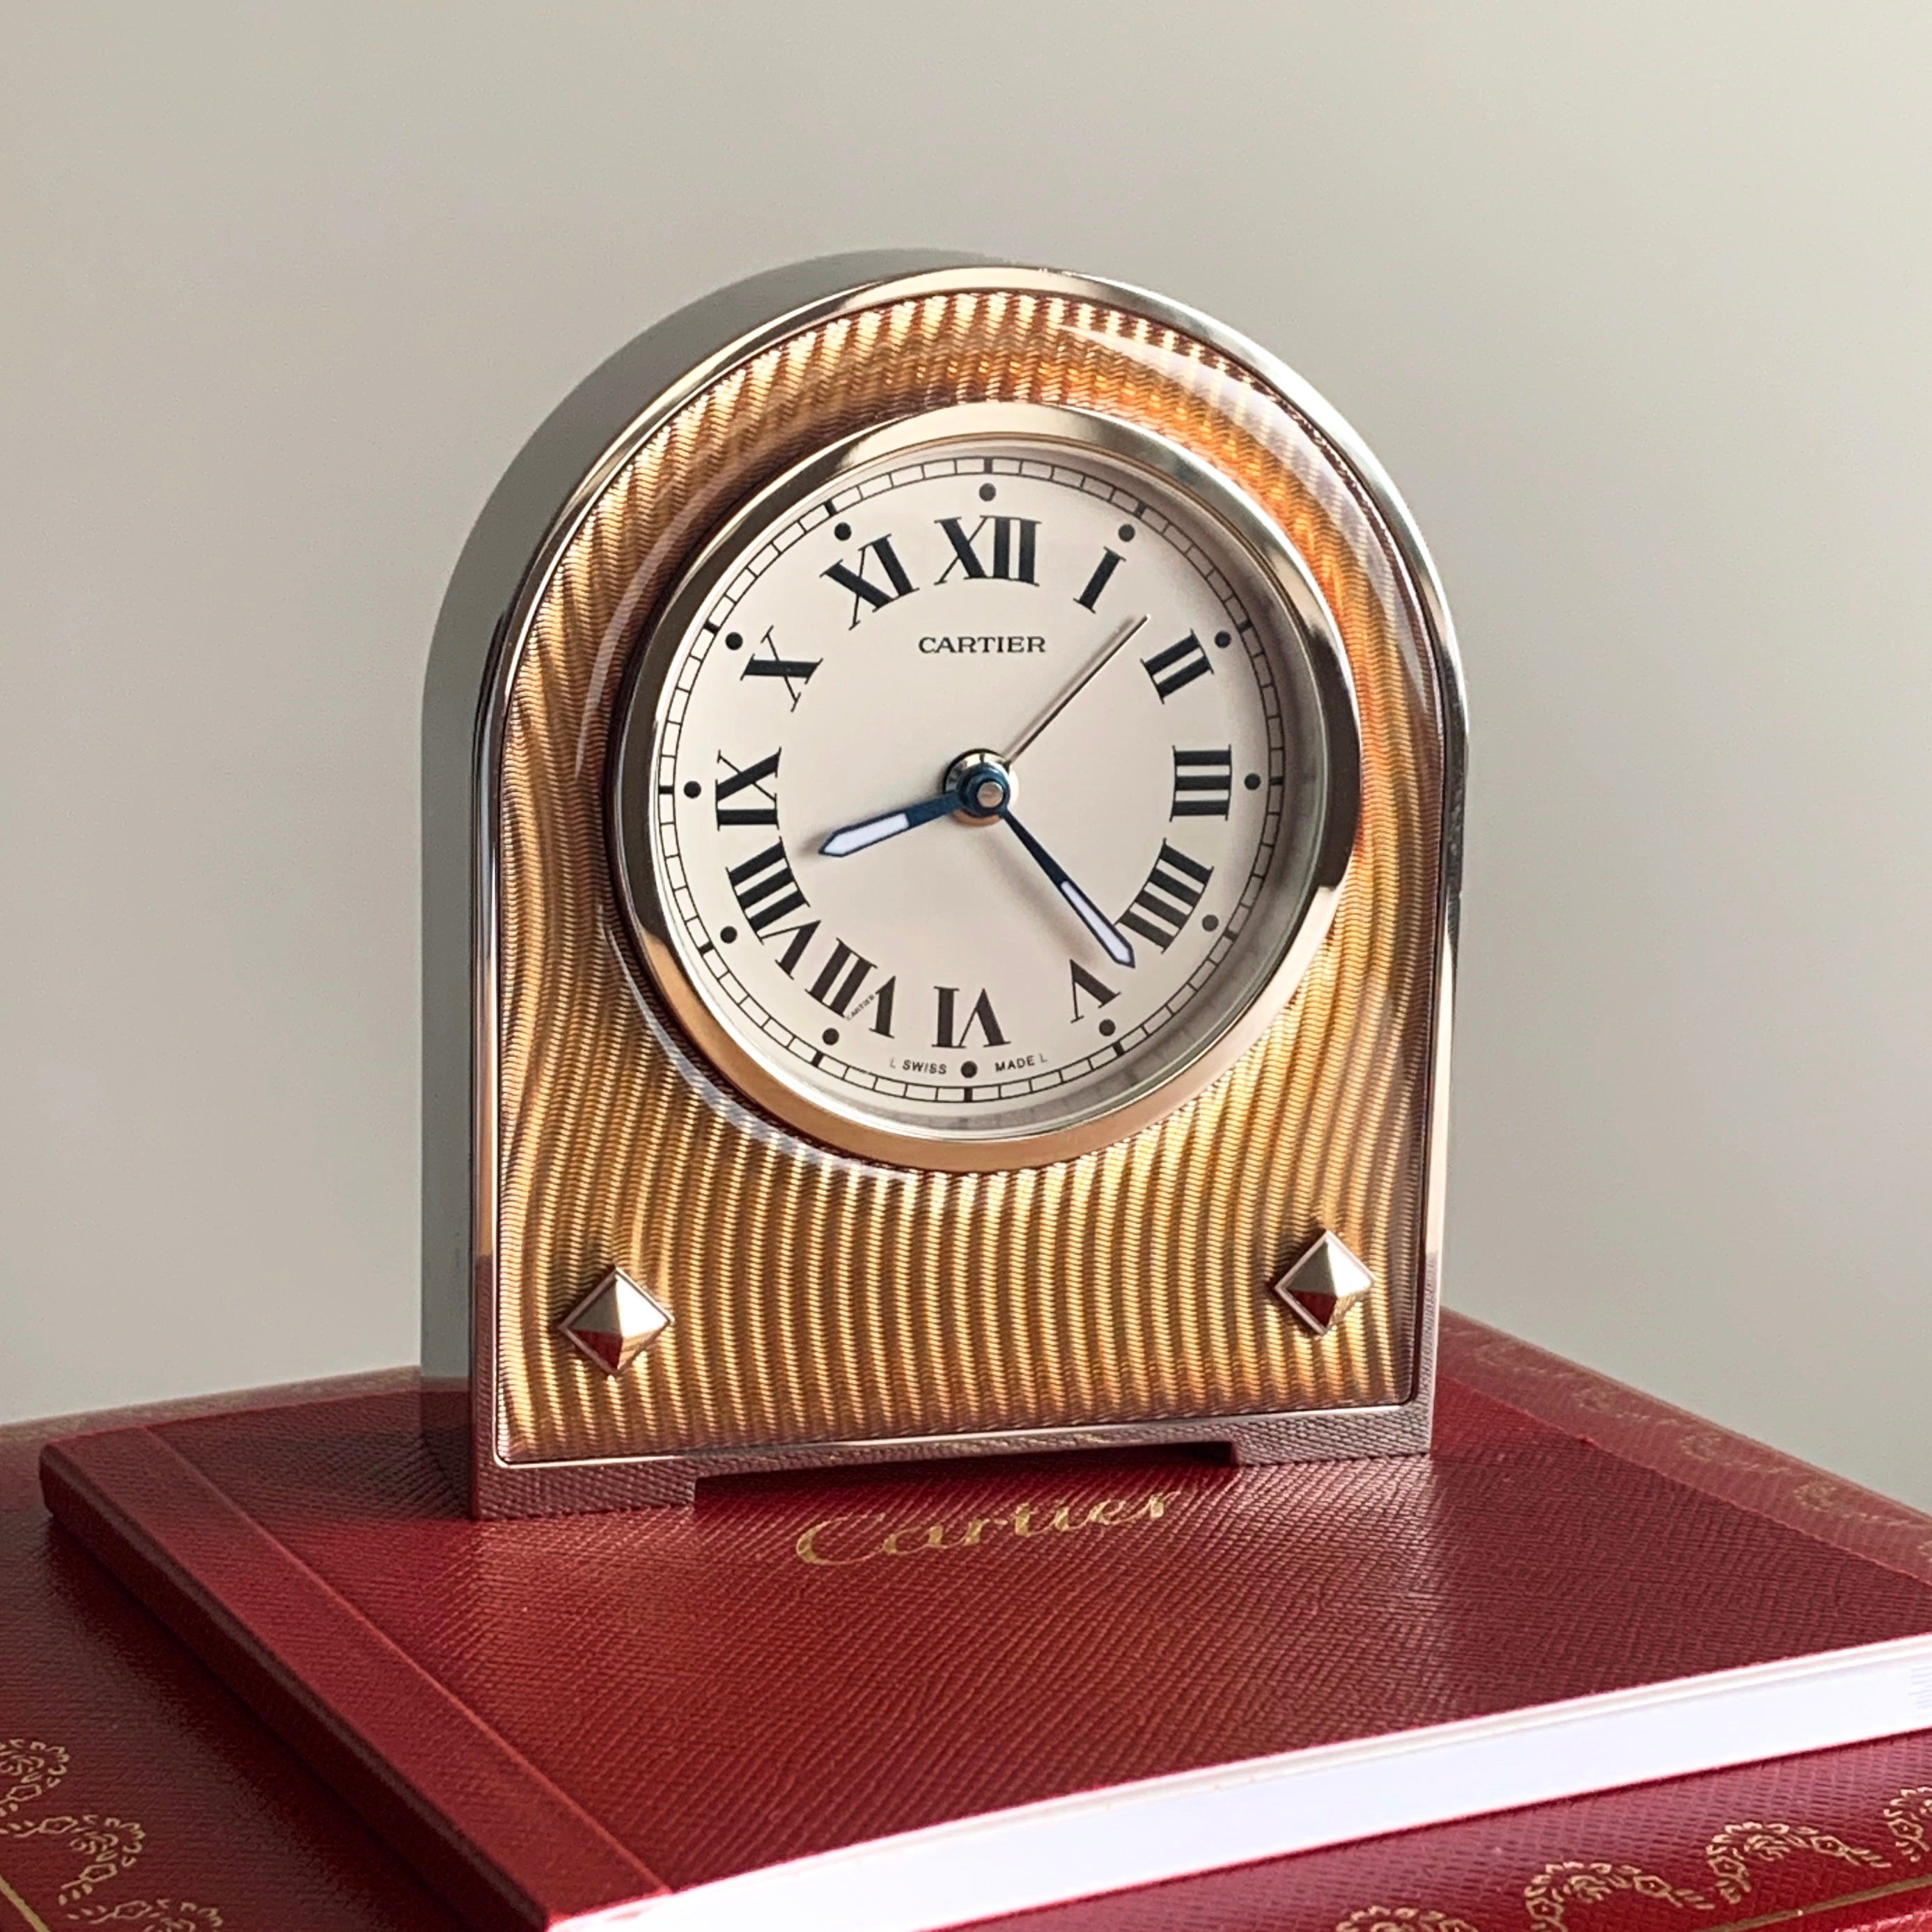 Cartier Steel and Lacquer Desk Clock with Alarm, Ref. 2746 – SWISS HOURS